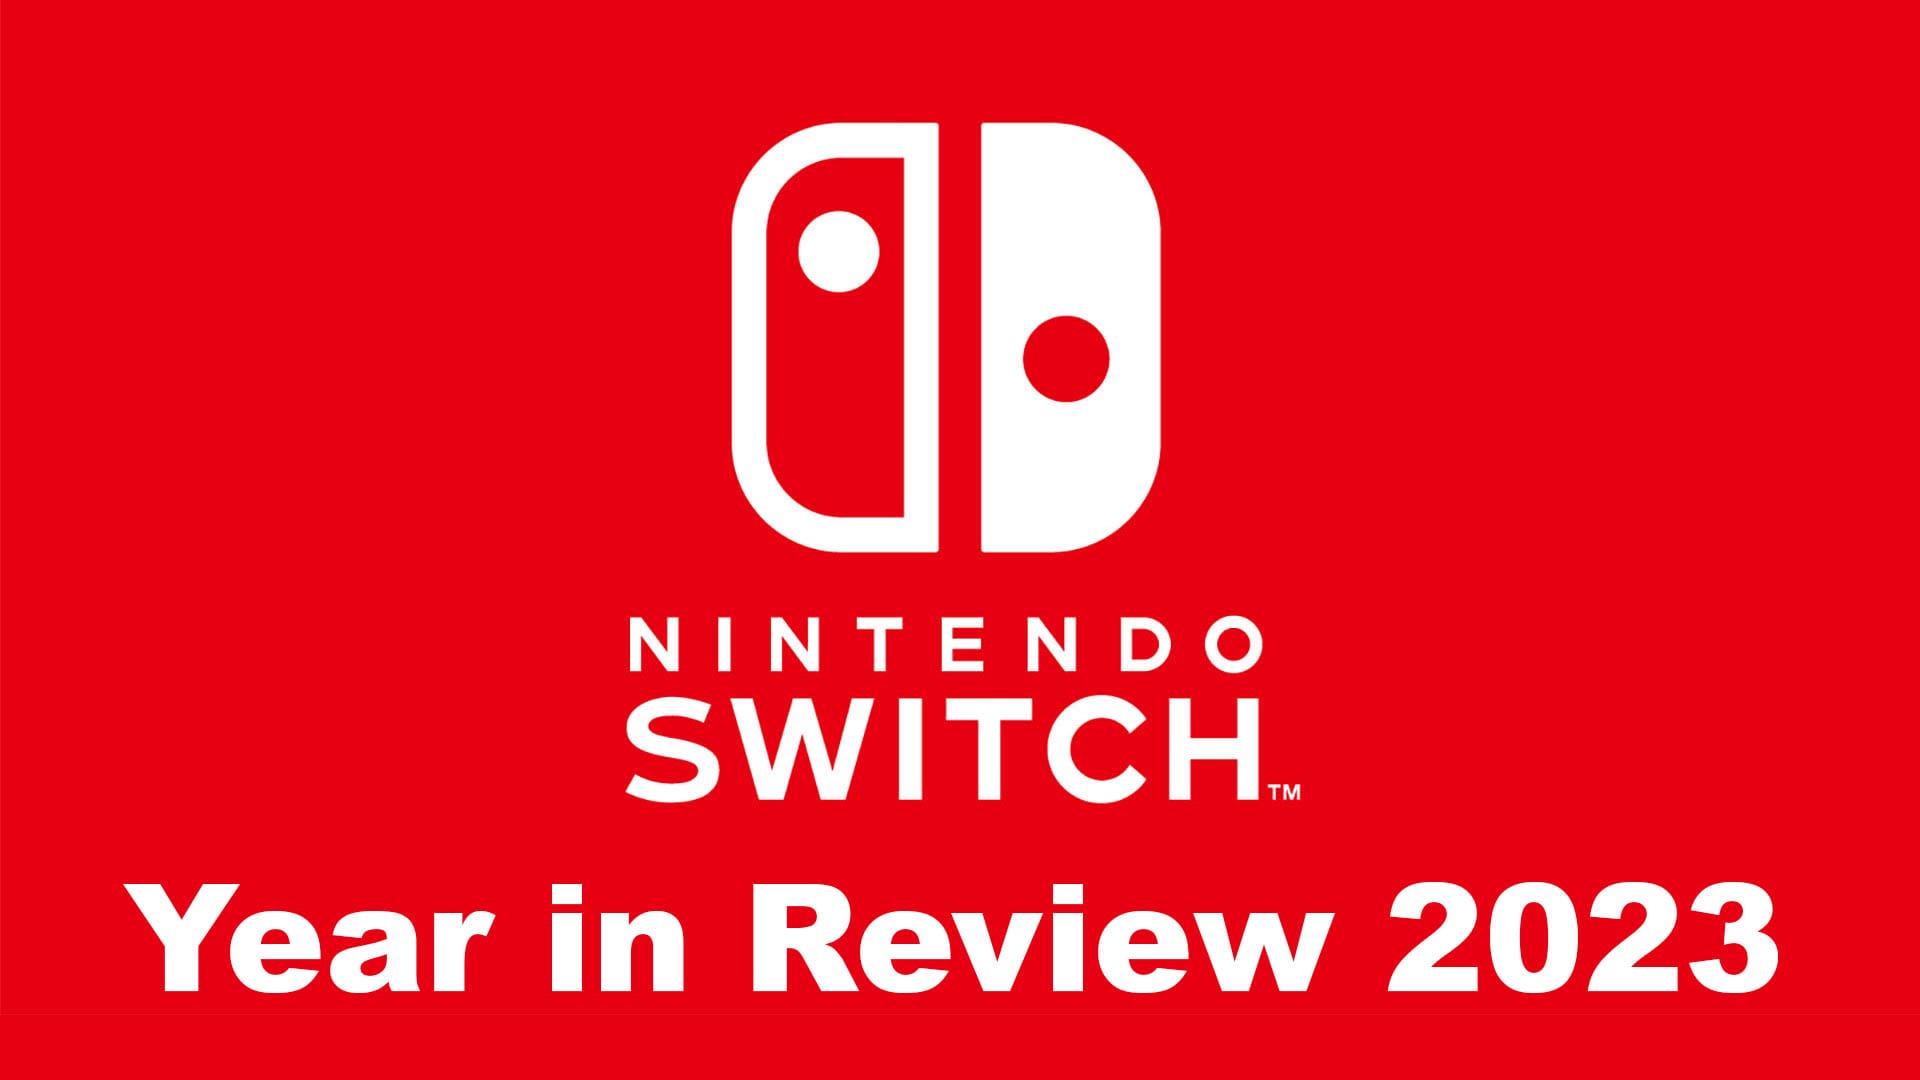 It's time for your year in review with Nintendo Switch! Check the